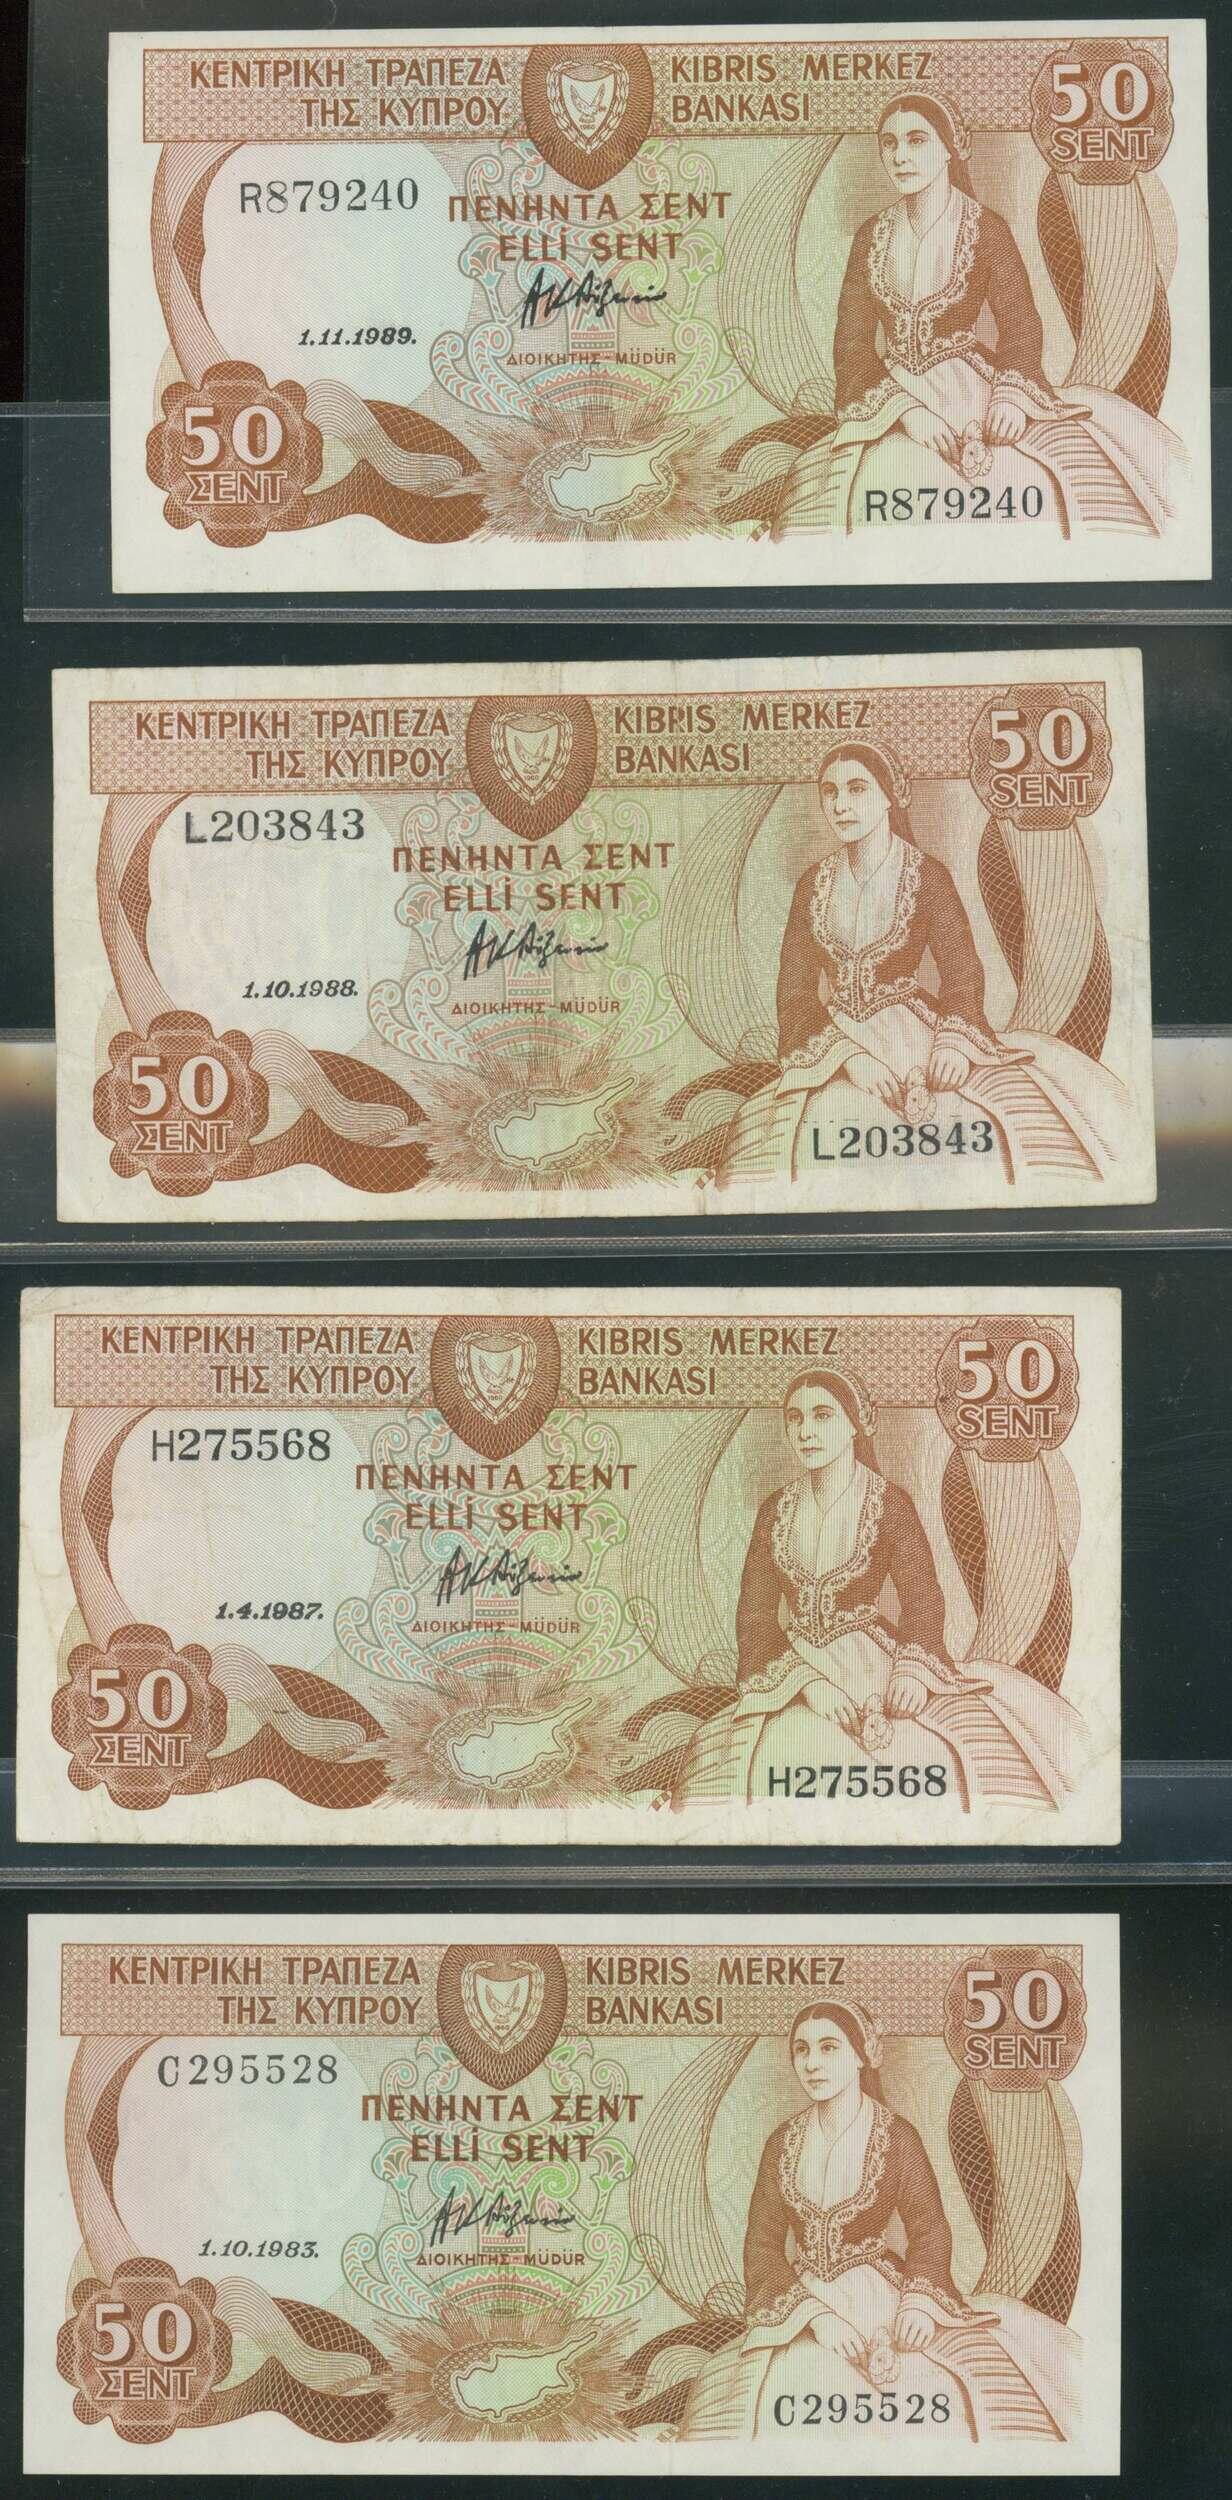 Philasearch.com - Banknotes - Cyprus